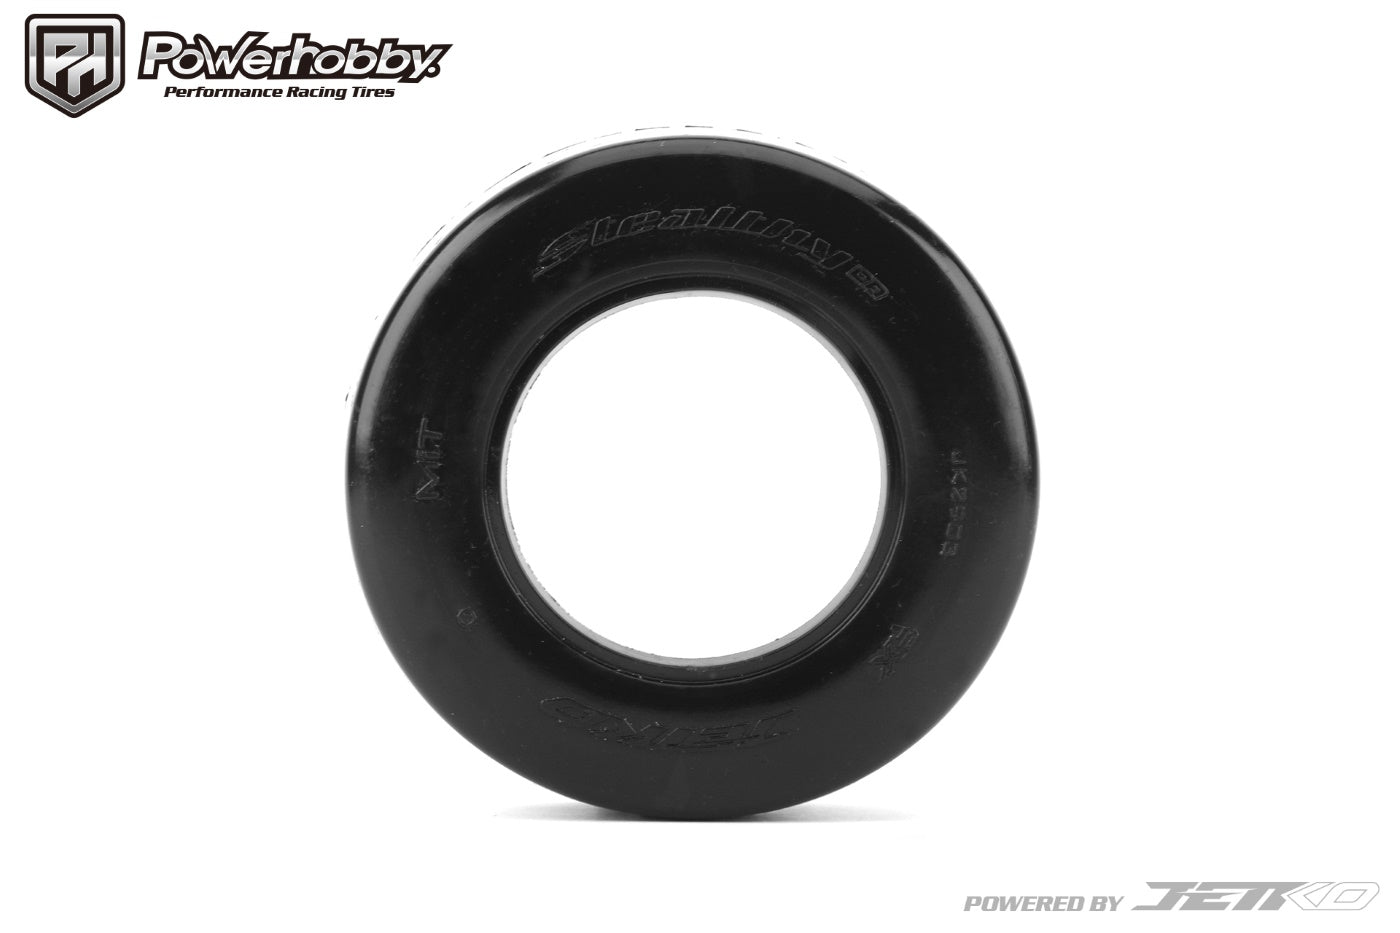 Powerhobby 1/10 Stealth BELTED Rear 2.2"/3.0" Drag Racing Tires Ultra Soft.